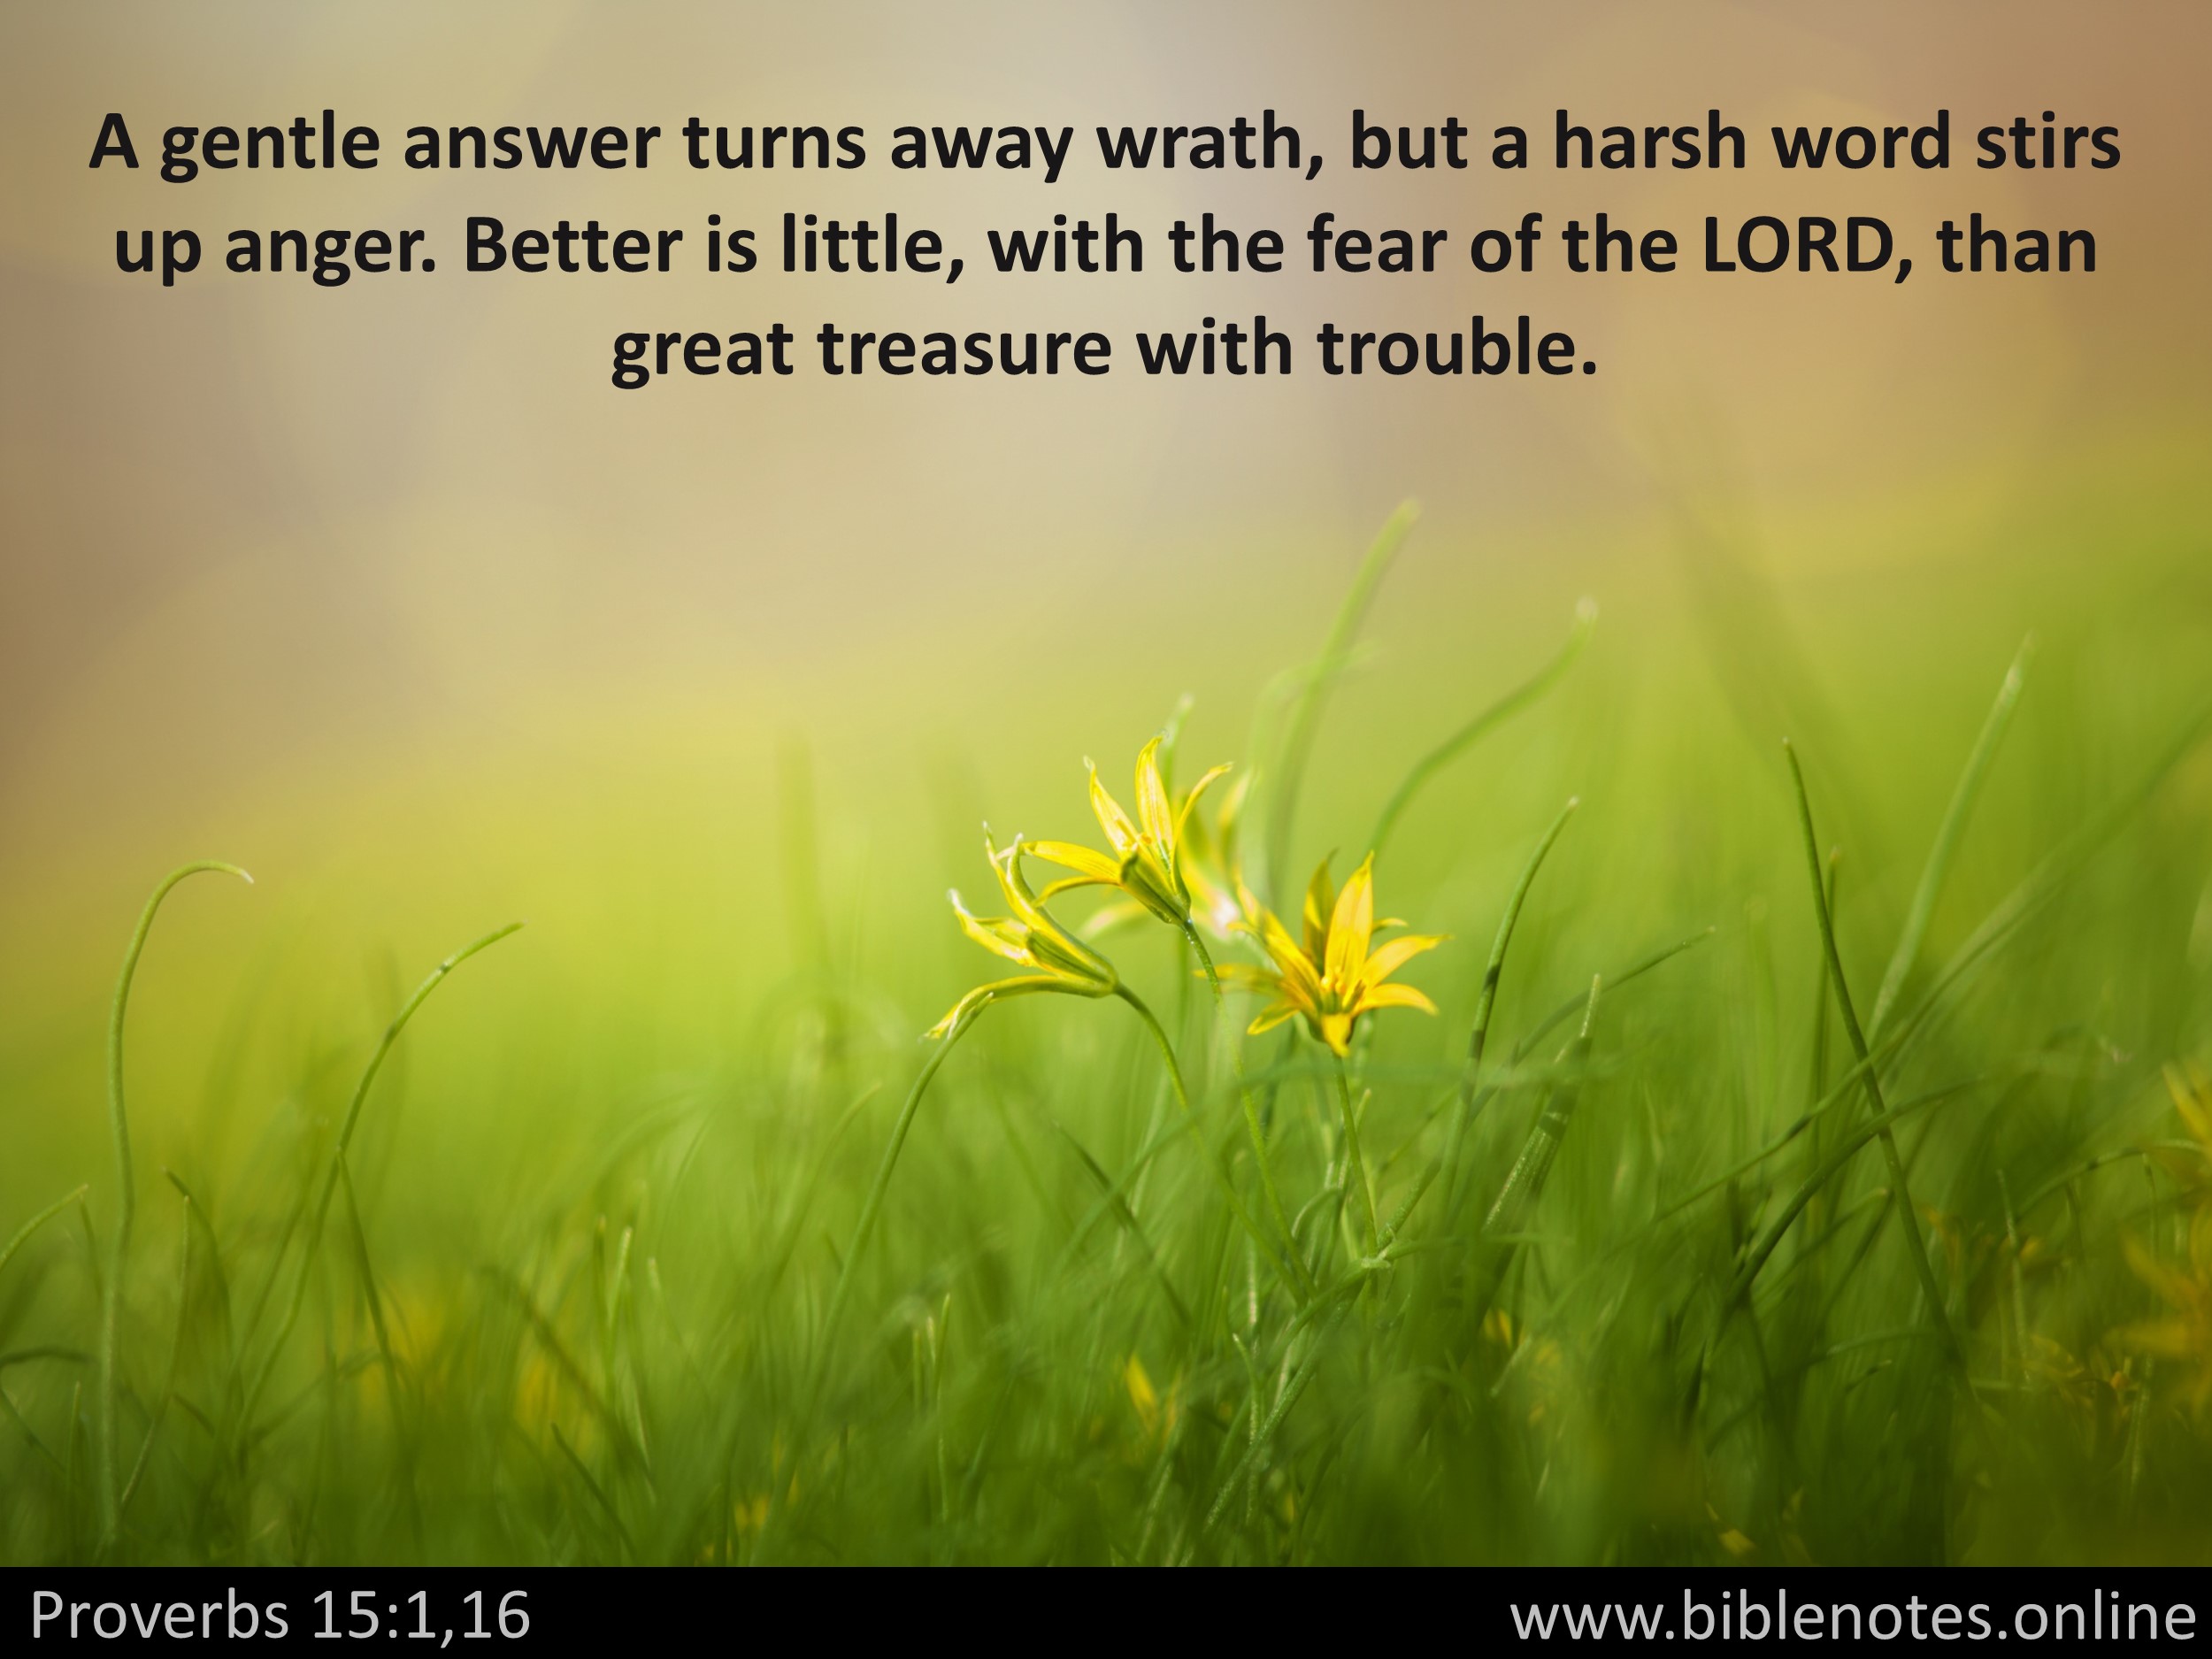 Bible Verse from Proverbs Chapter 15